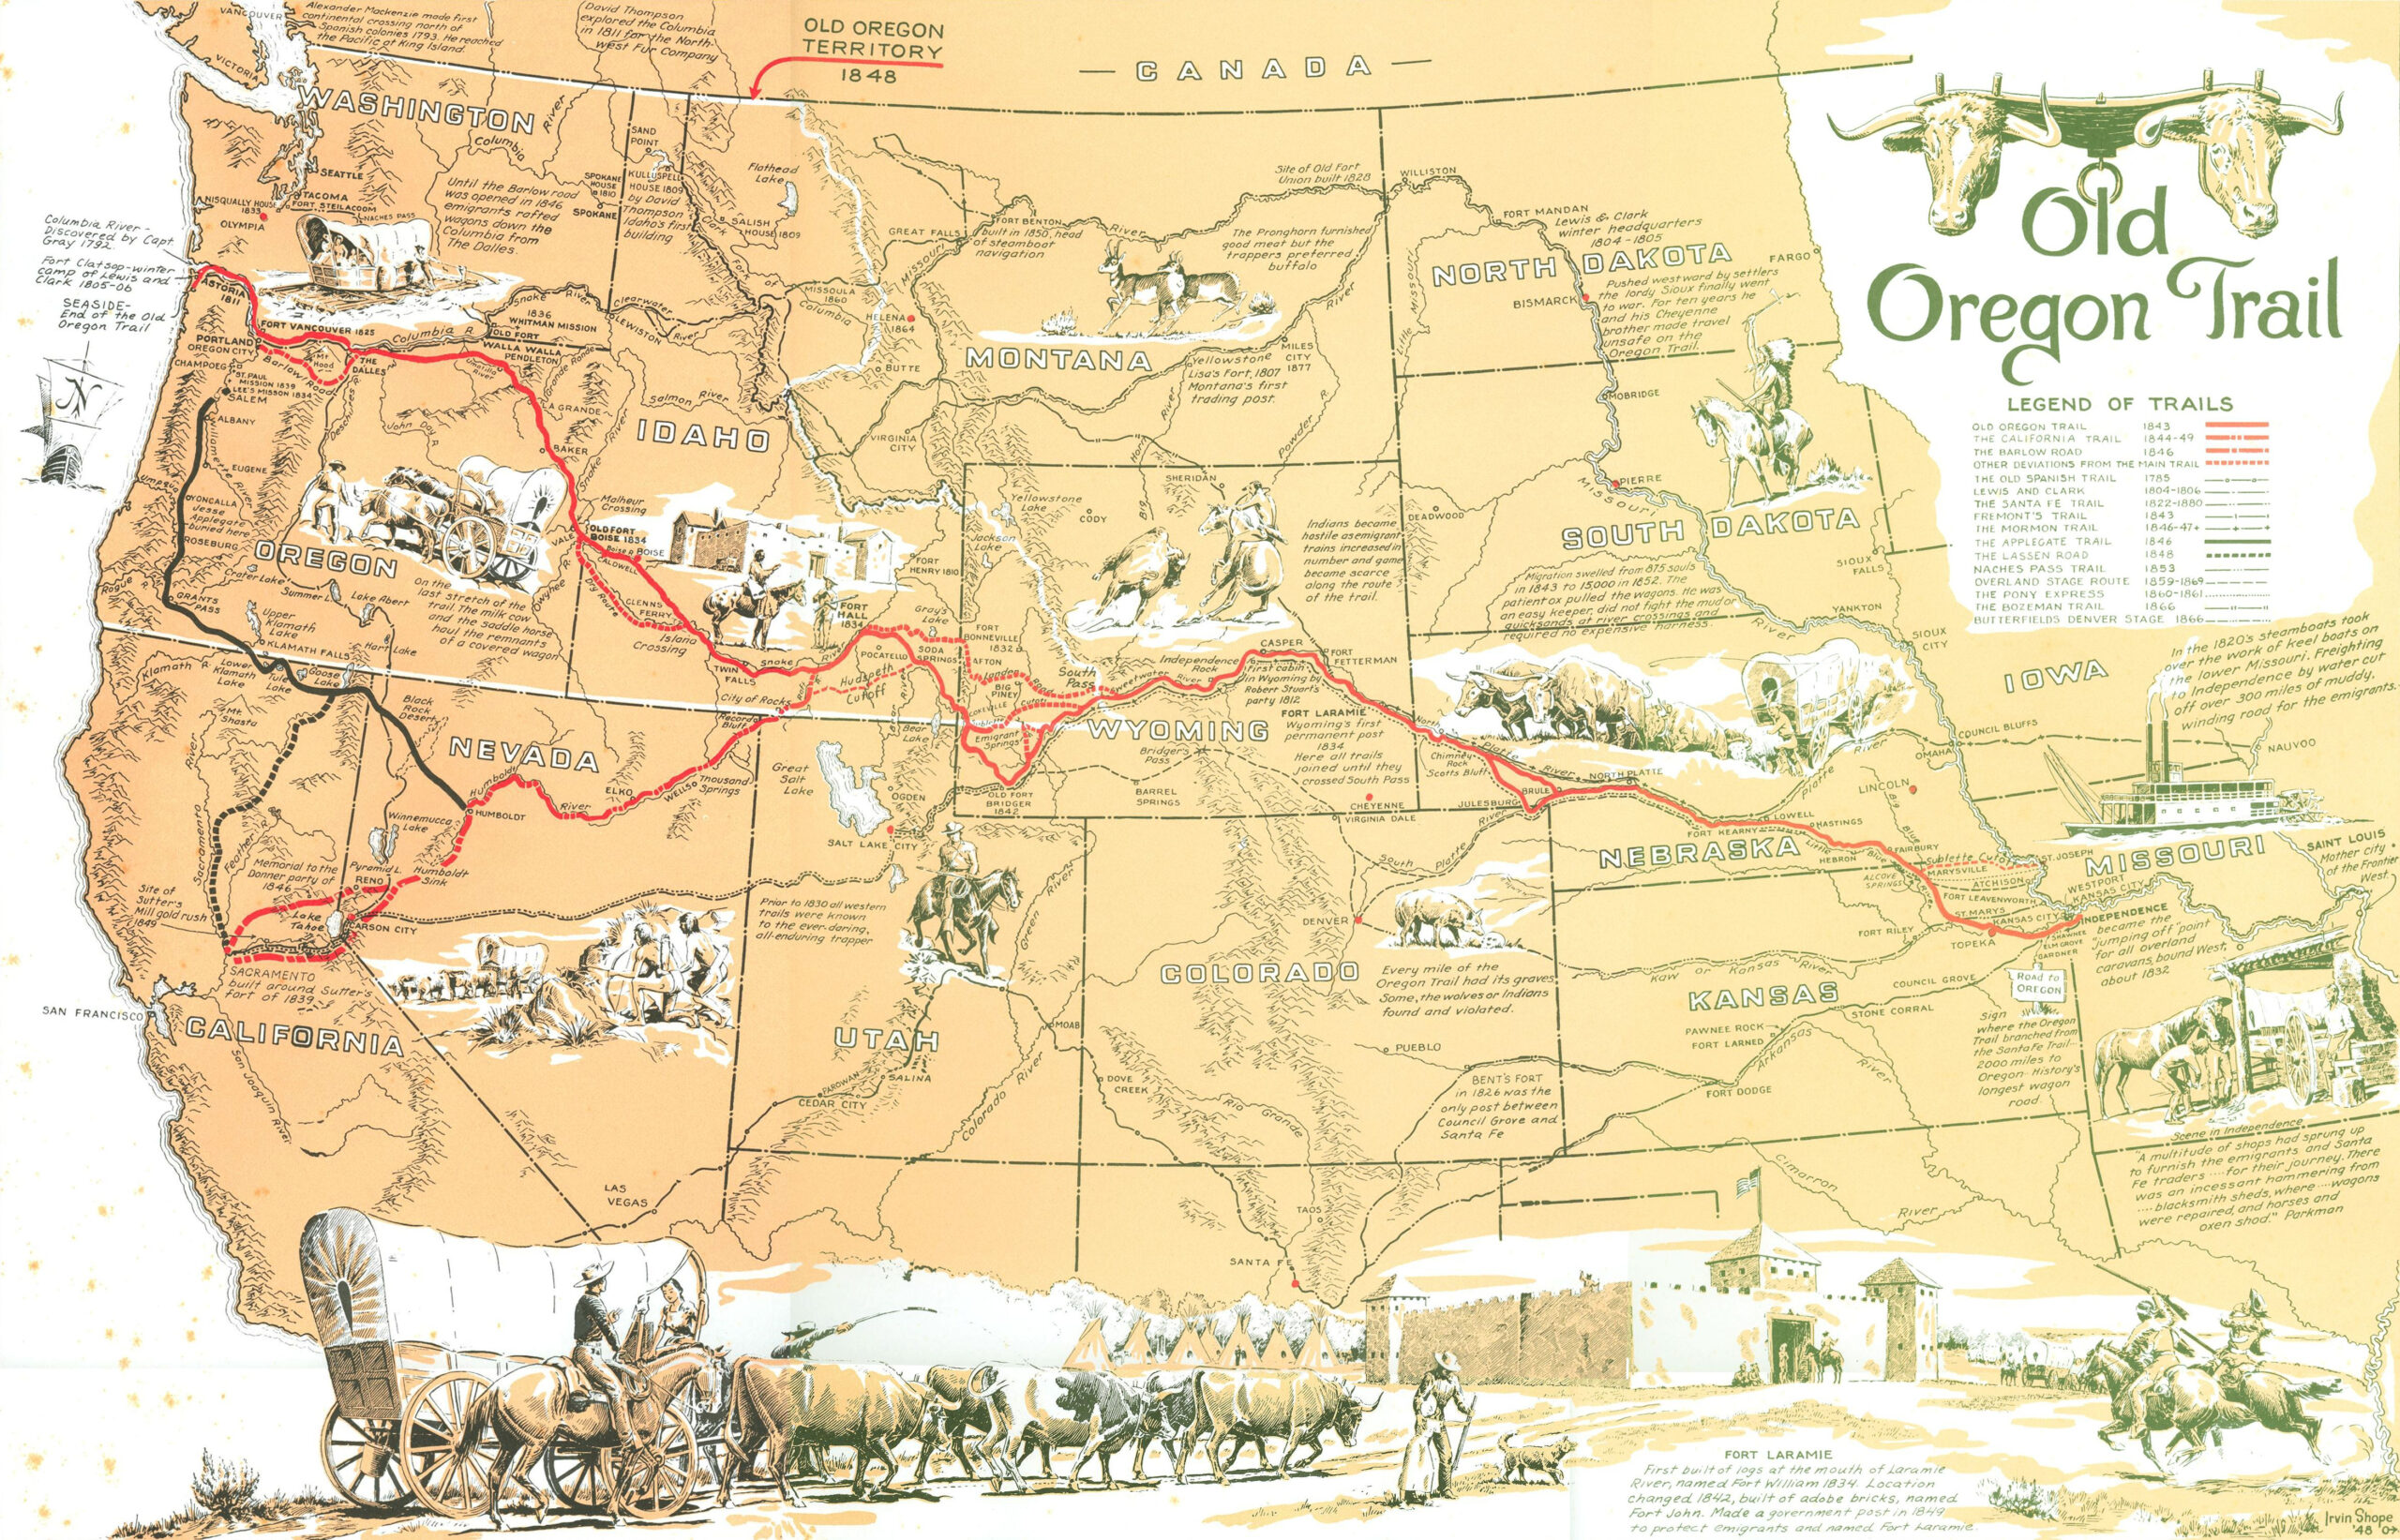 Stephenie Flora Described The Oregon Trail Journey Of Perry And His 